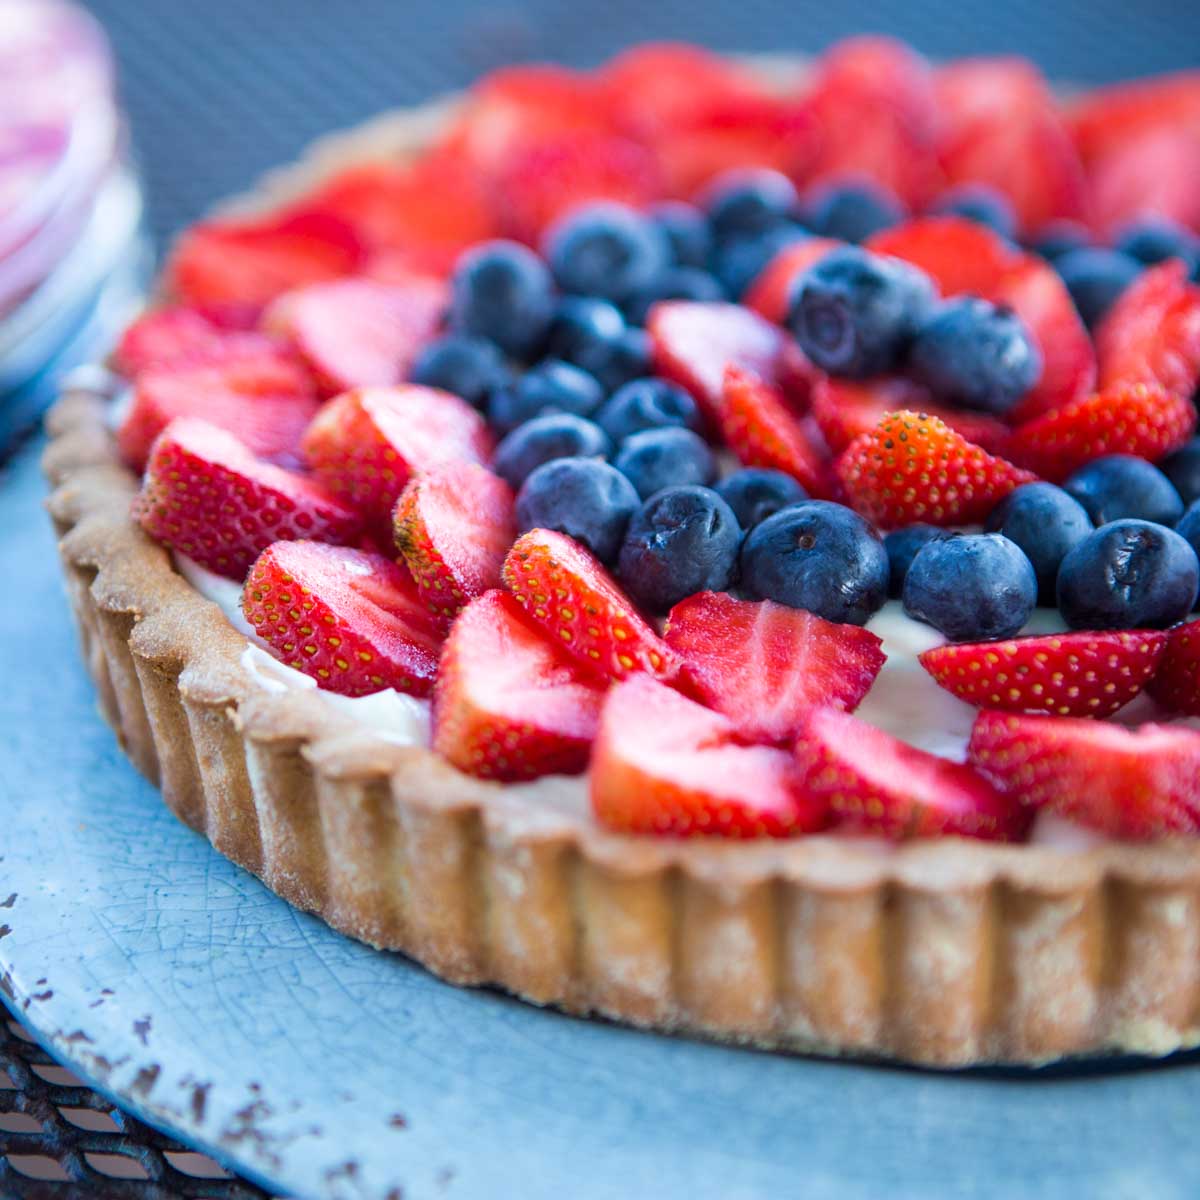 A blue plate with a strawberry tart featuring a cookie crust, creamy filling, and fresh summer berries in a red and blue pattern on the top.